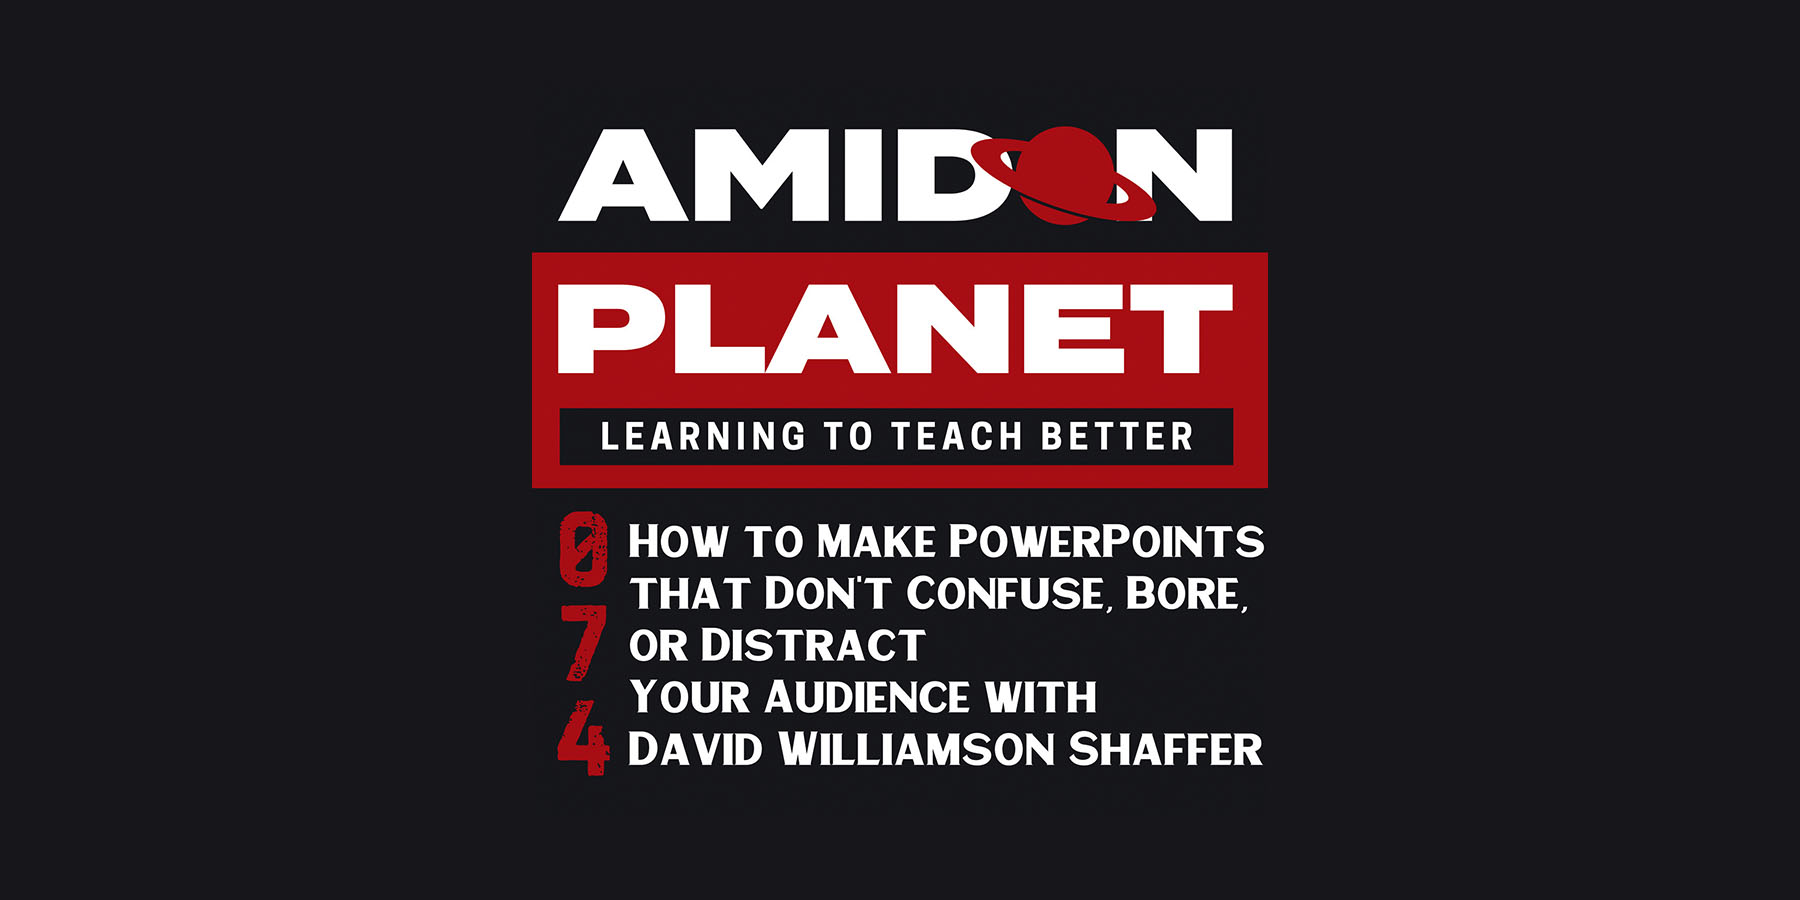 Amidon Planet Podcast E074: How to Make PowerPoints that Don’t Confuse, Bore, or Distract Your Audience with David Williamson Shaffer